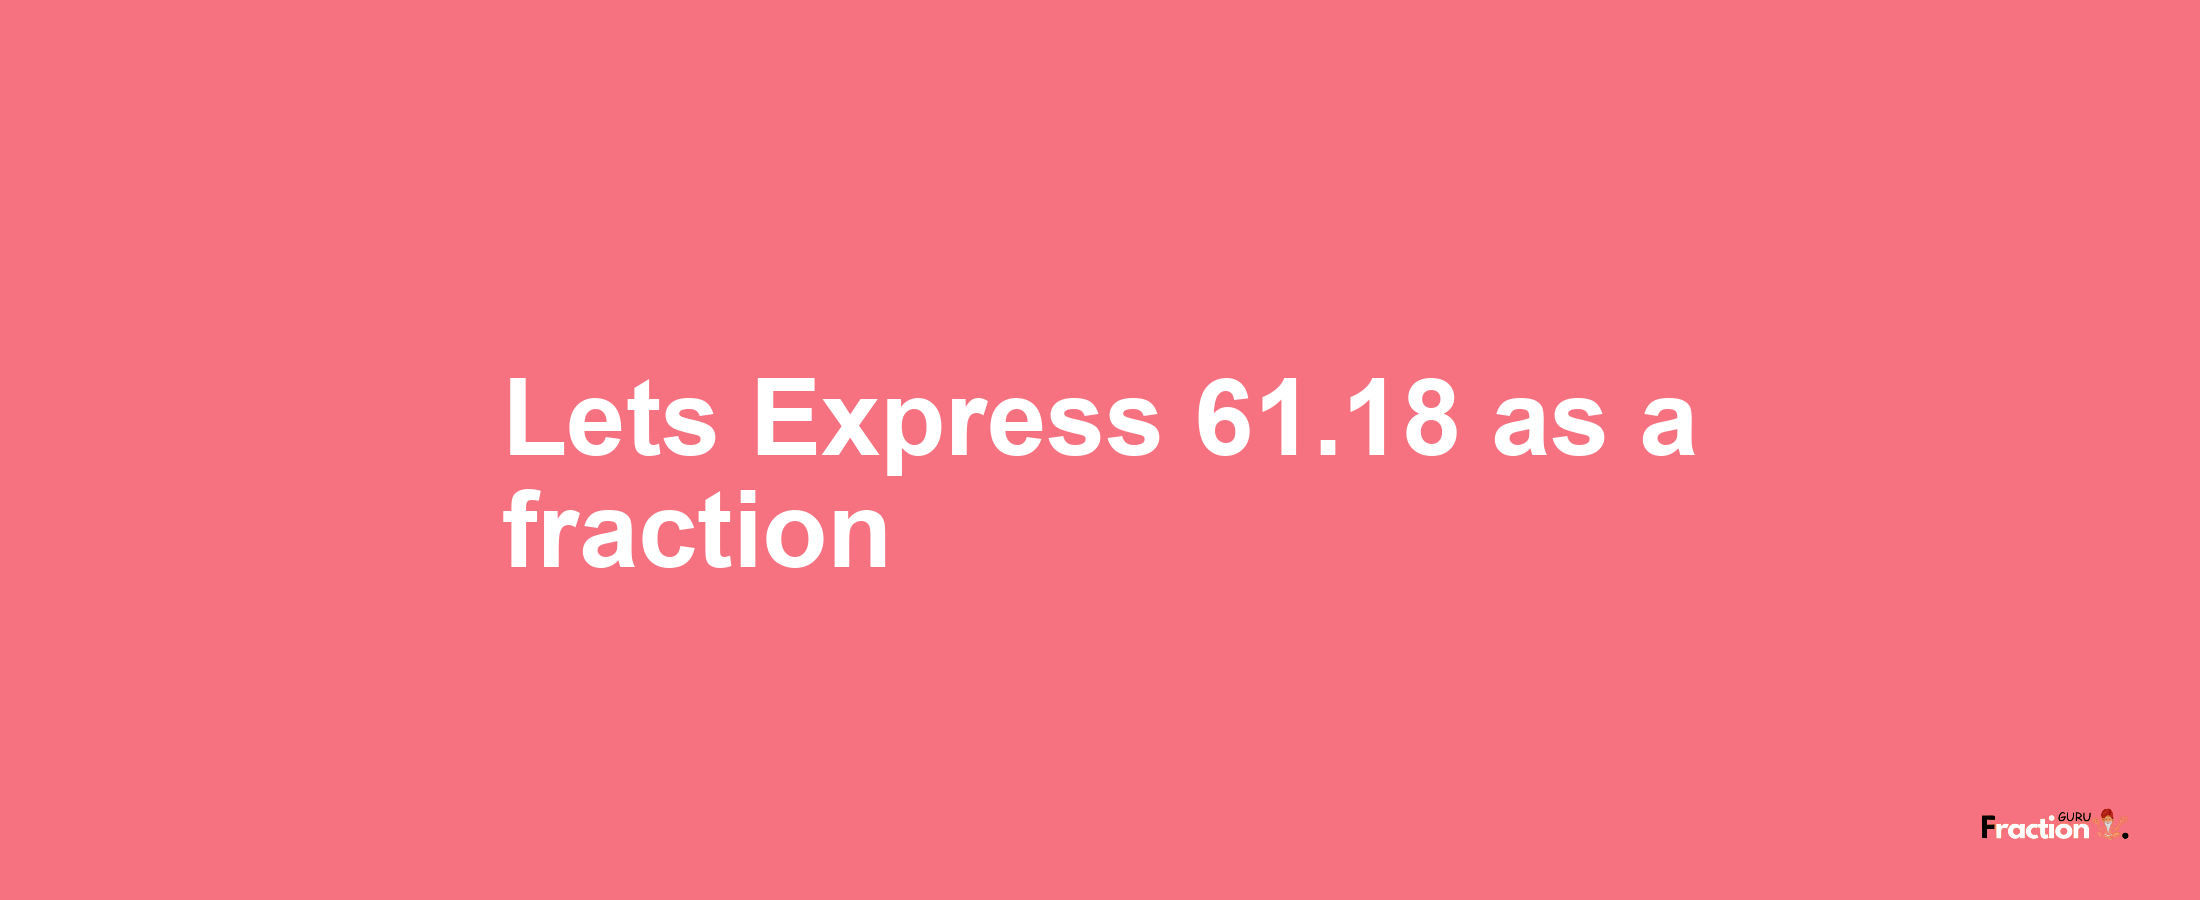 Lets Express 61.18 as afraction